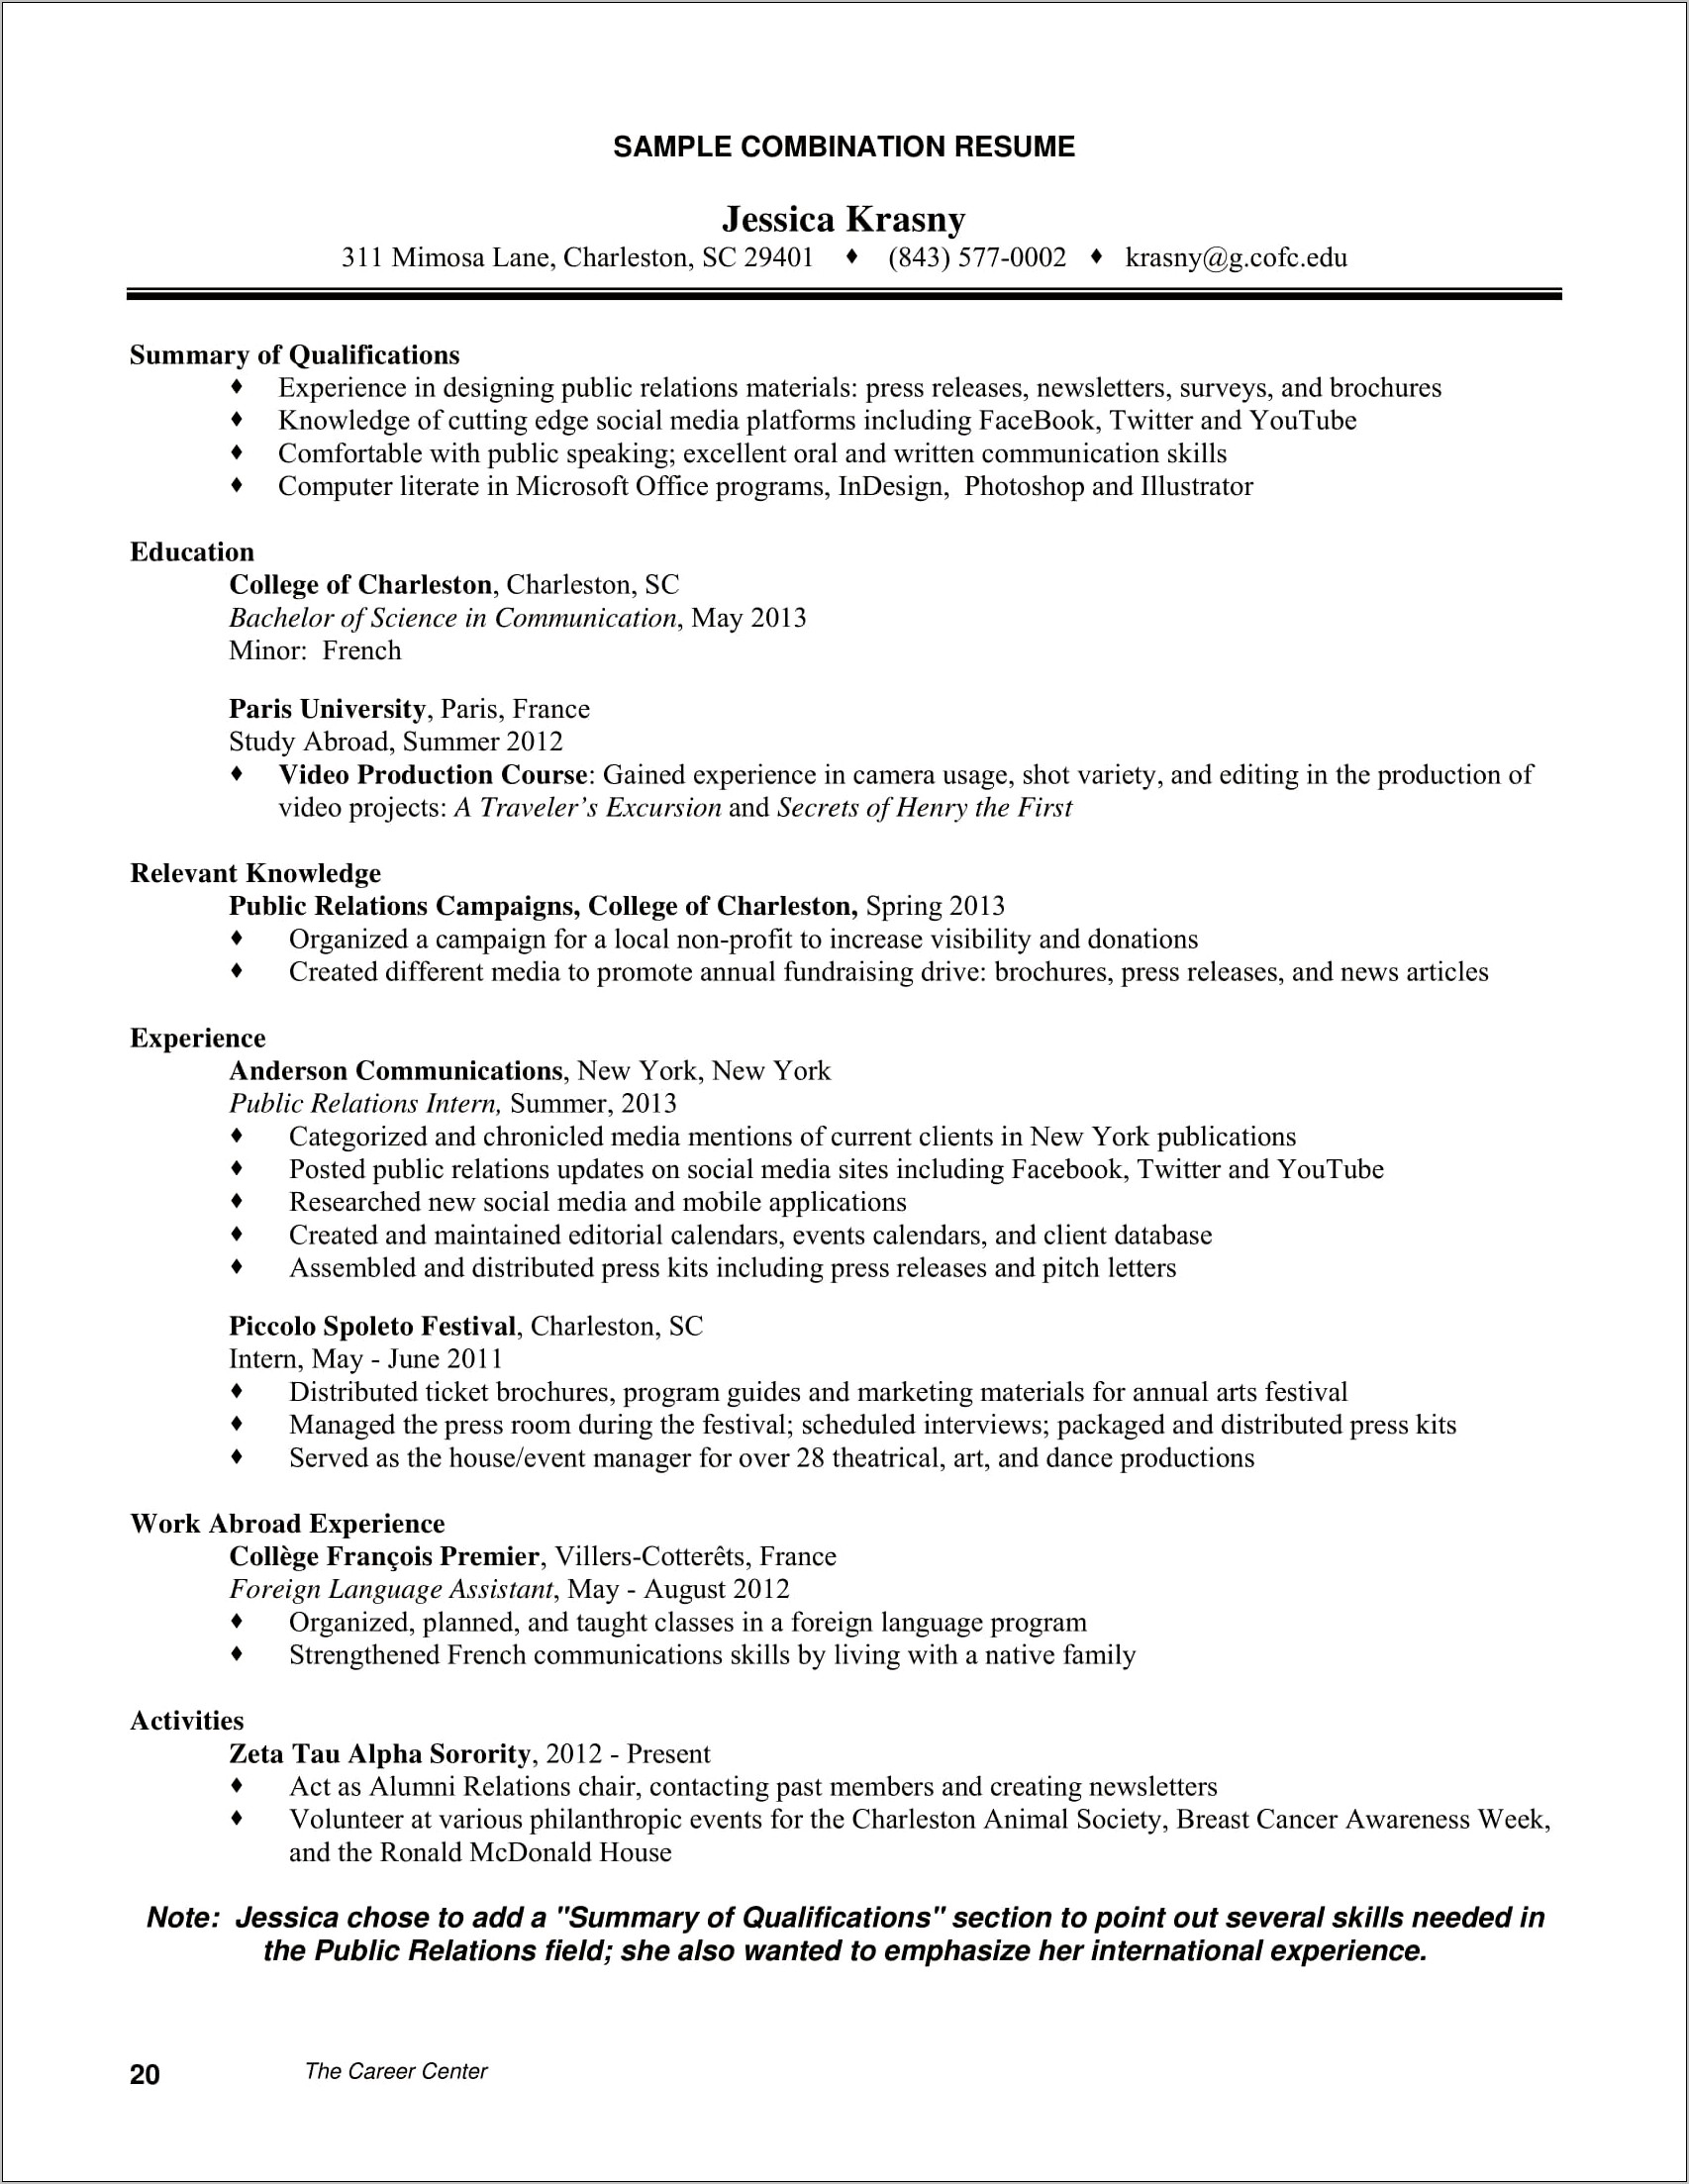 Sample Qualifications Profile For Resume